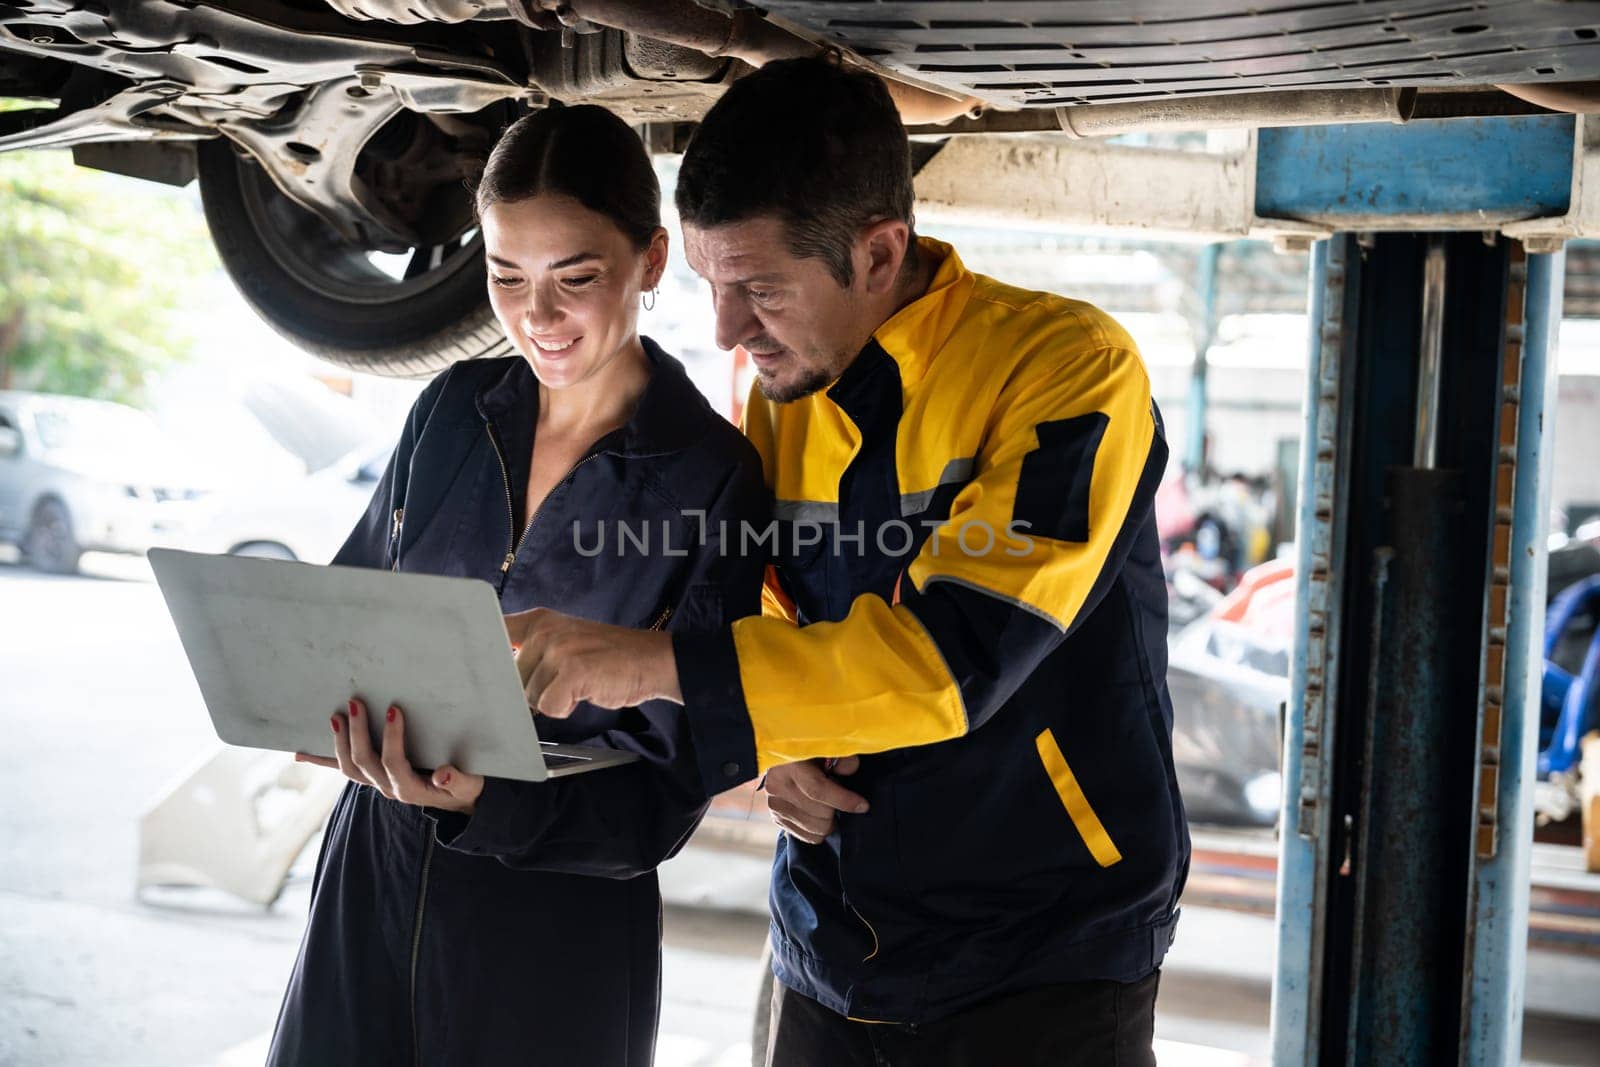 Two vehicle mechanic working together, conduct car inspection with laptop. Oxus by biancoblue